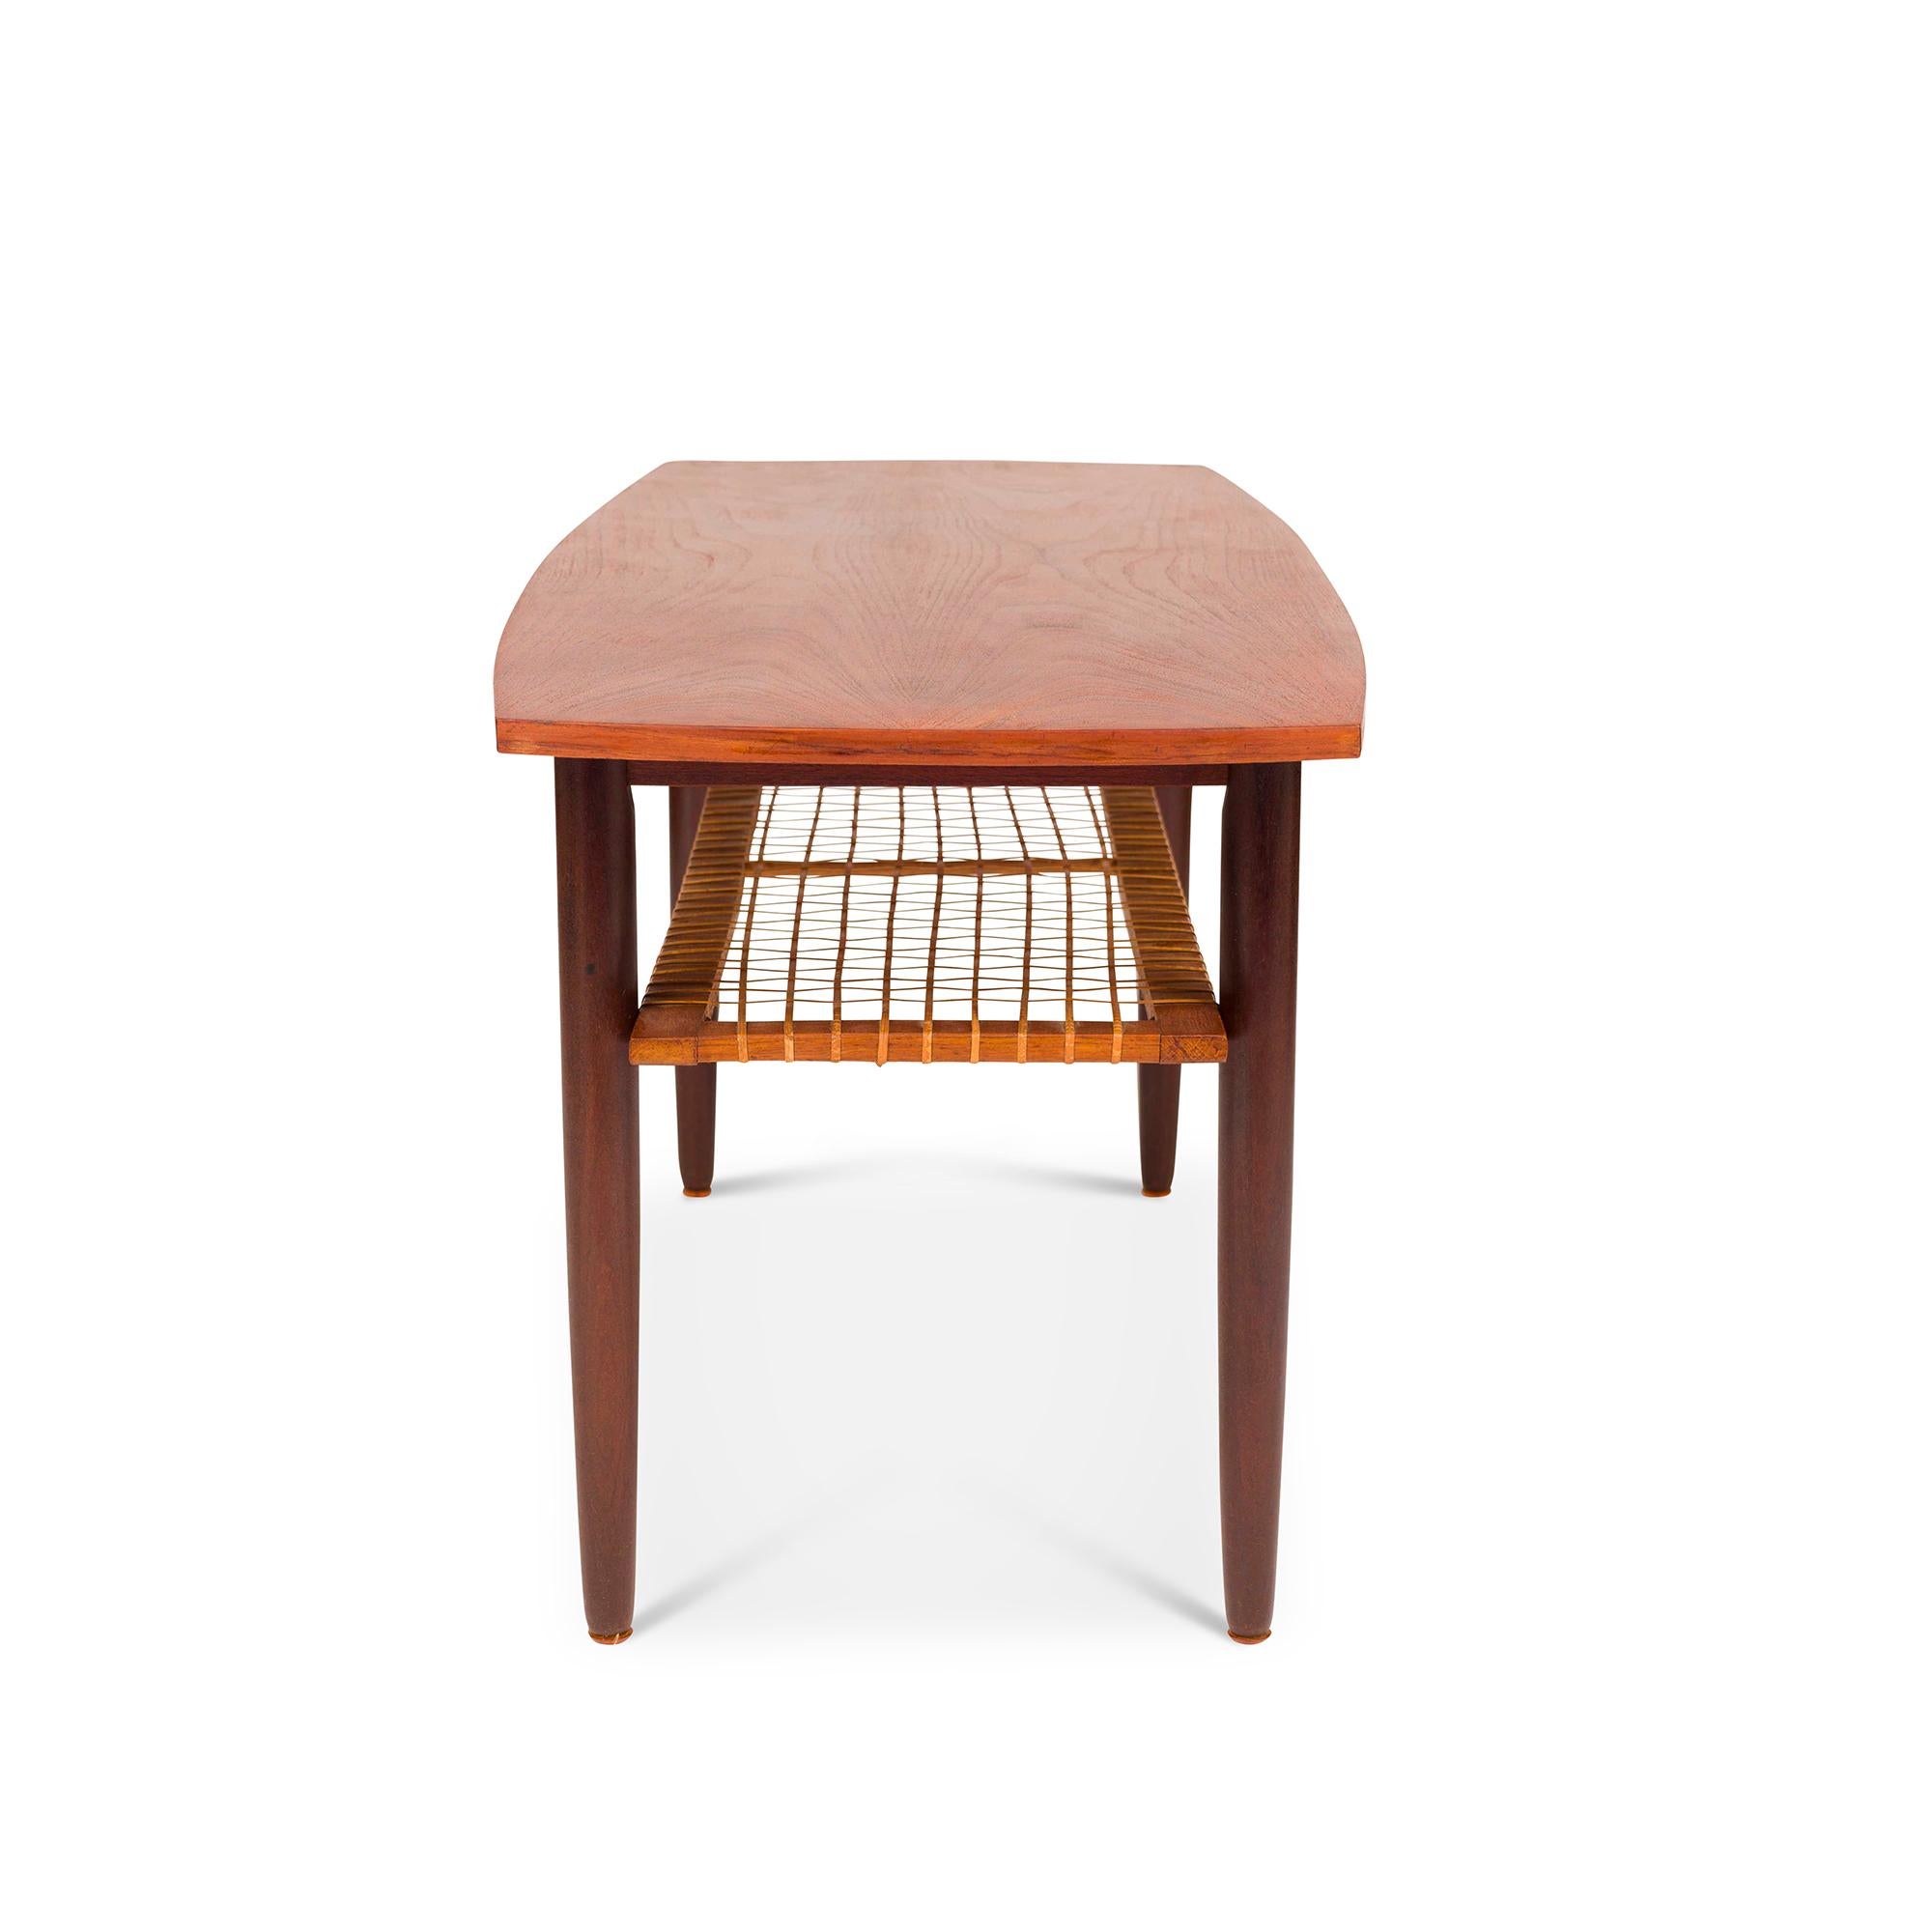 Vintage Danish Mid-Century Teak  and Cane Coffee Table 1960s For Sale 2